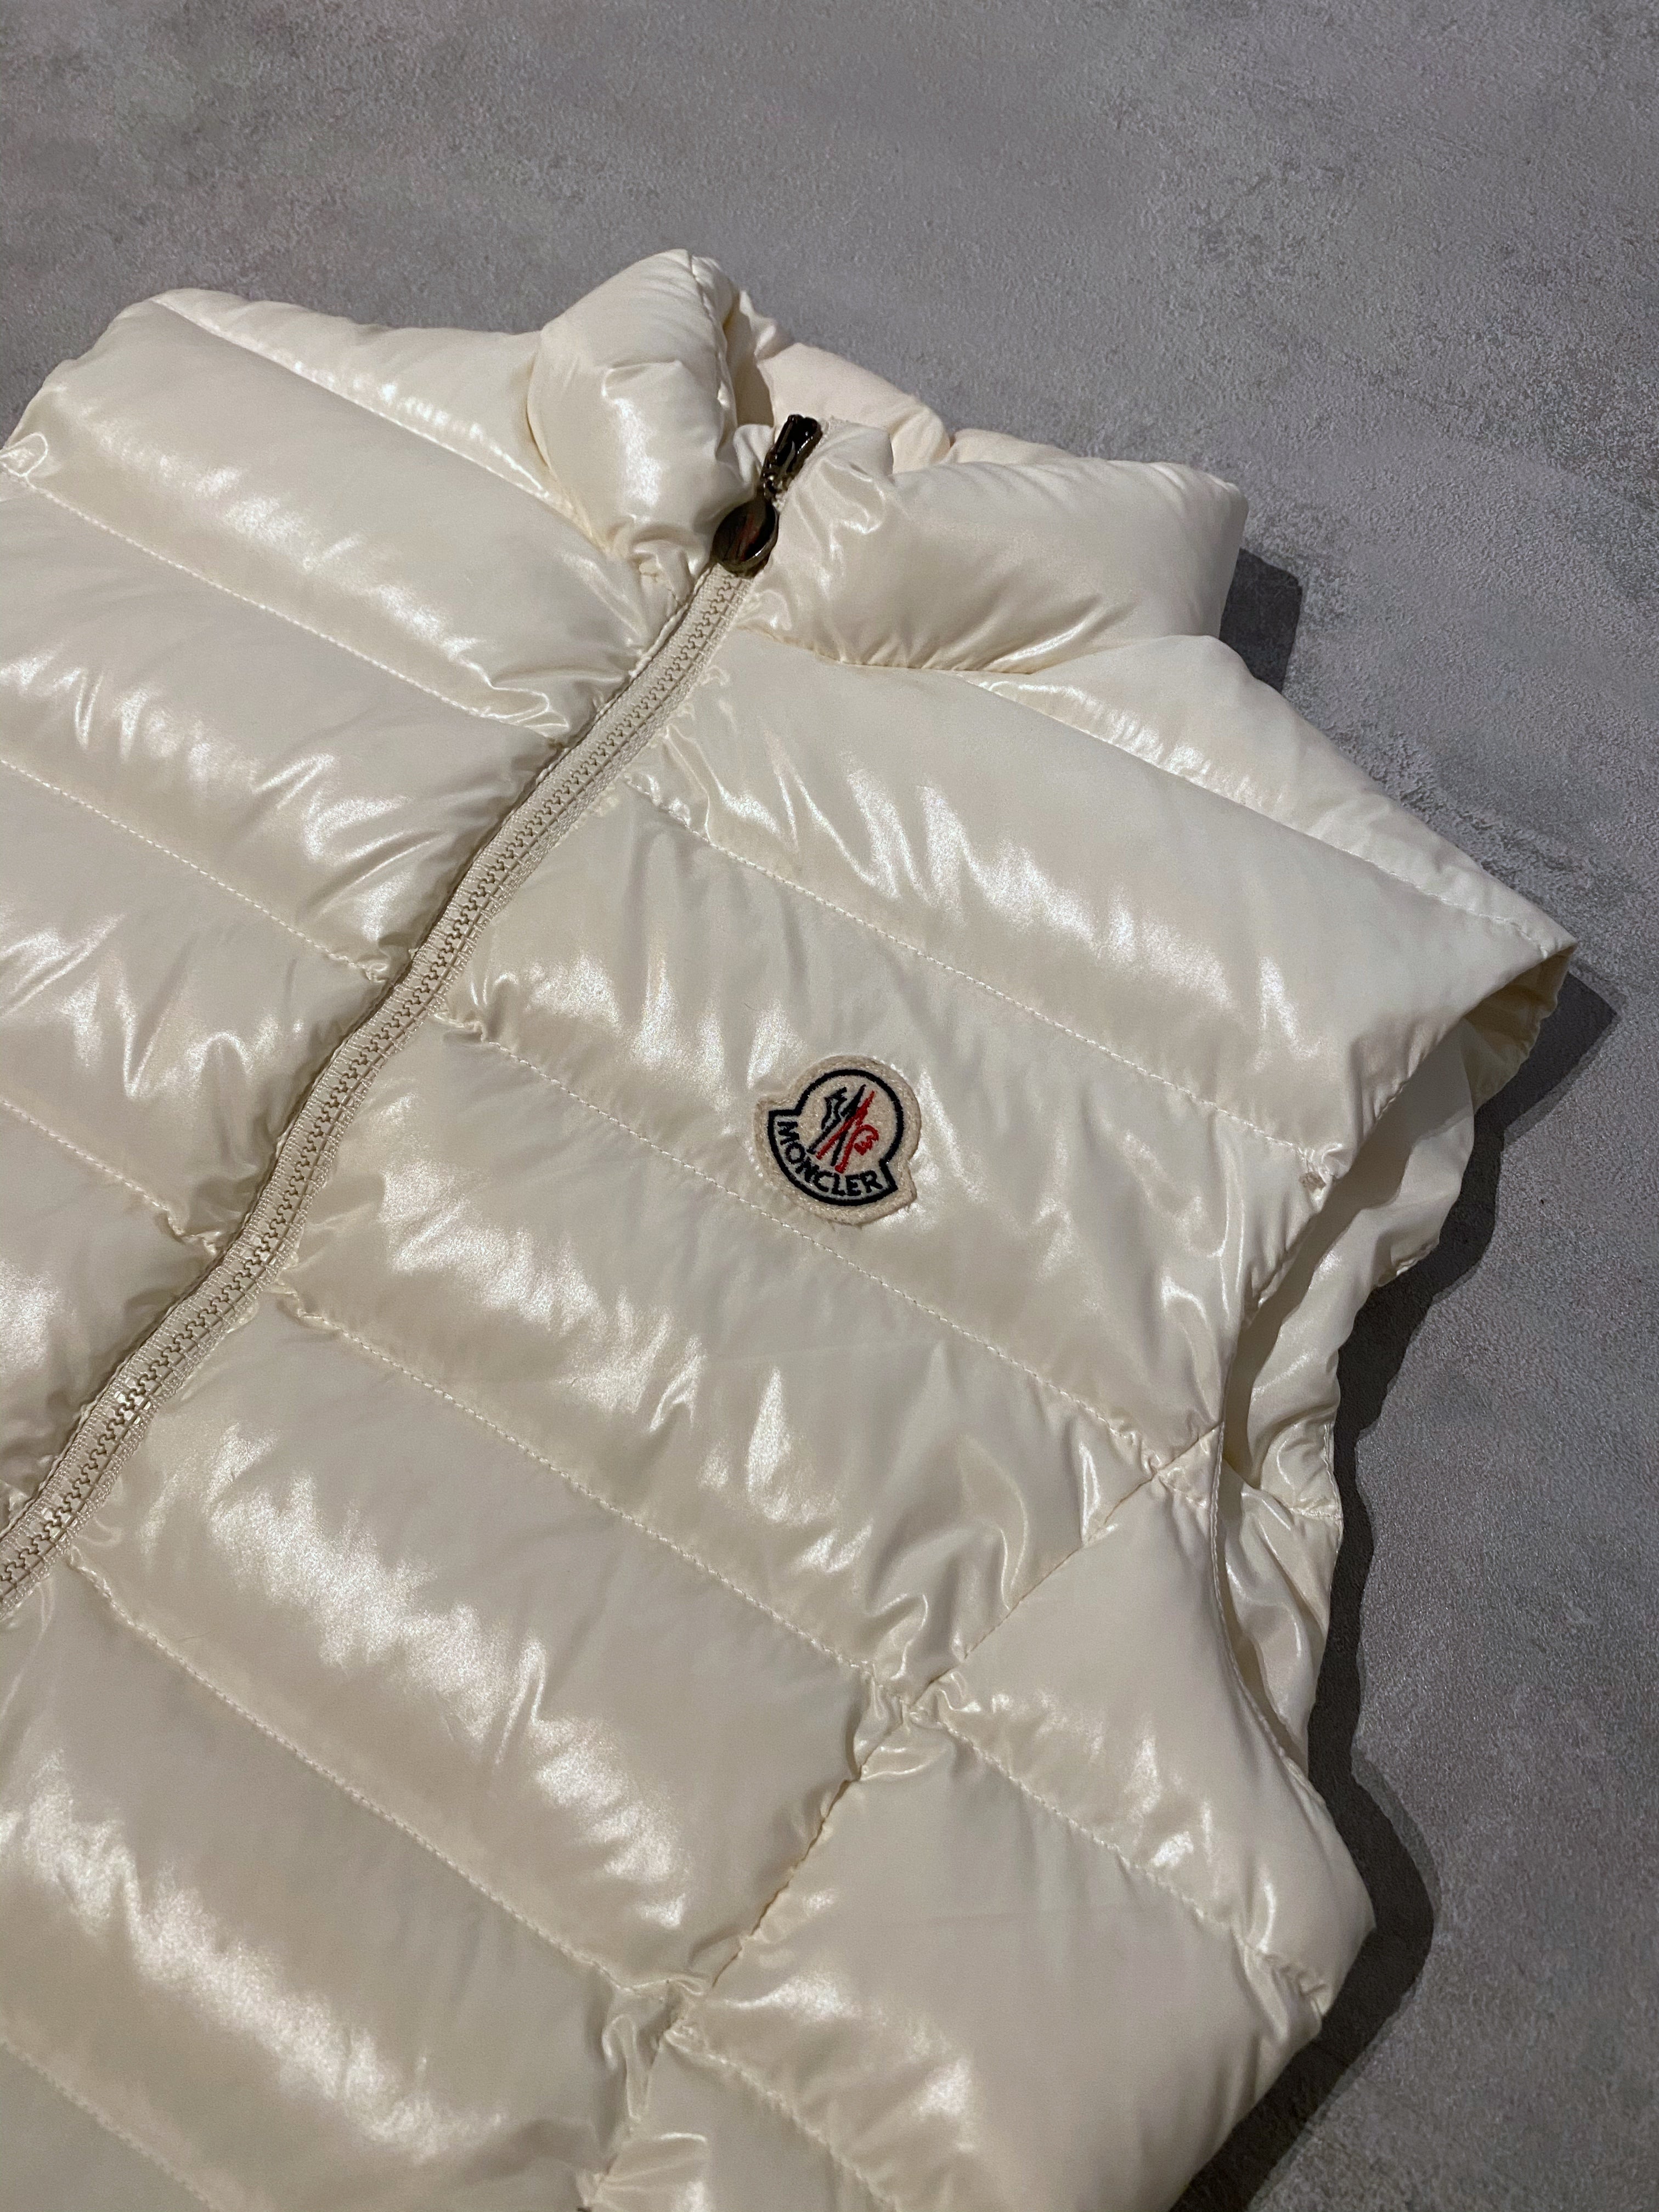 Moncler Ghany Gilet - Size 2